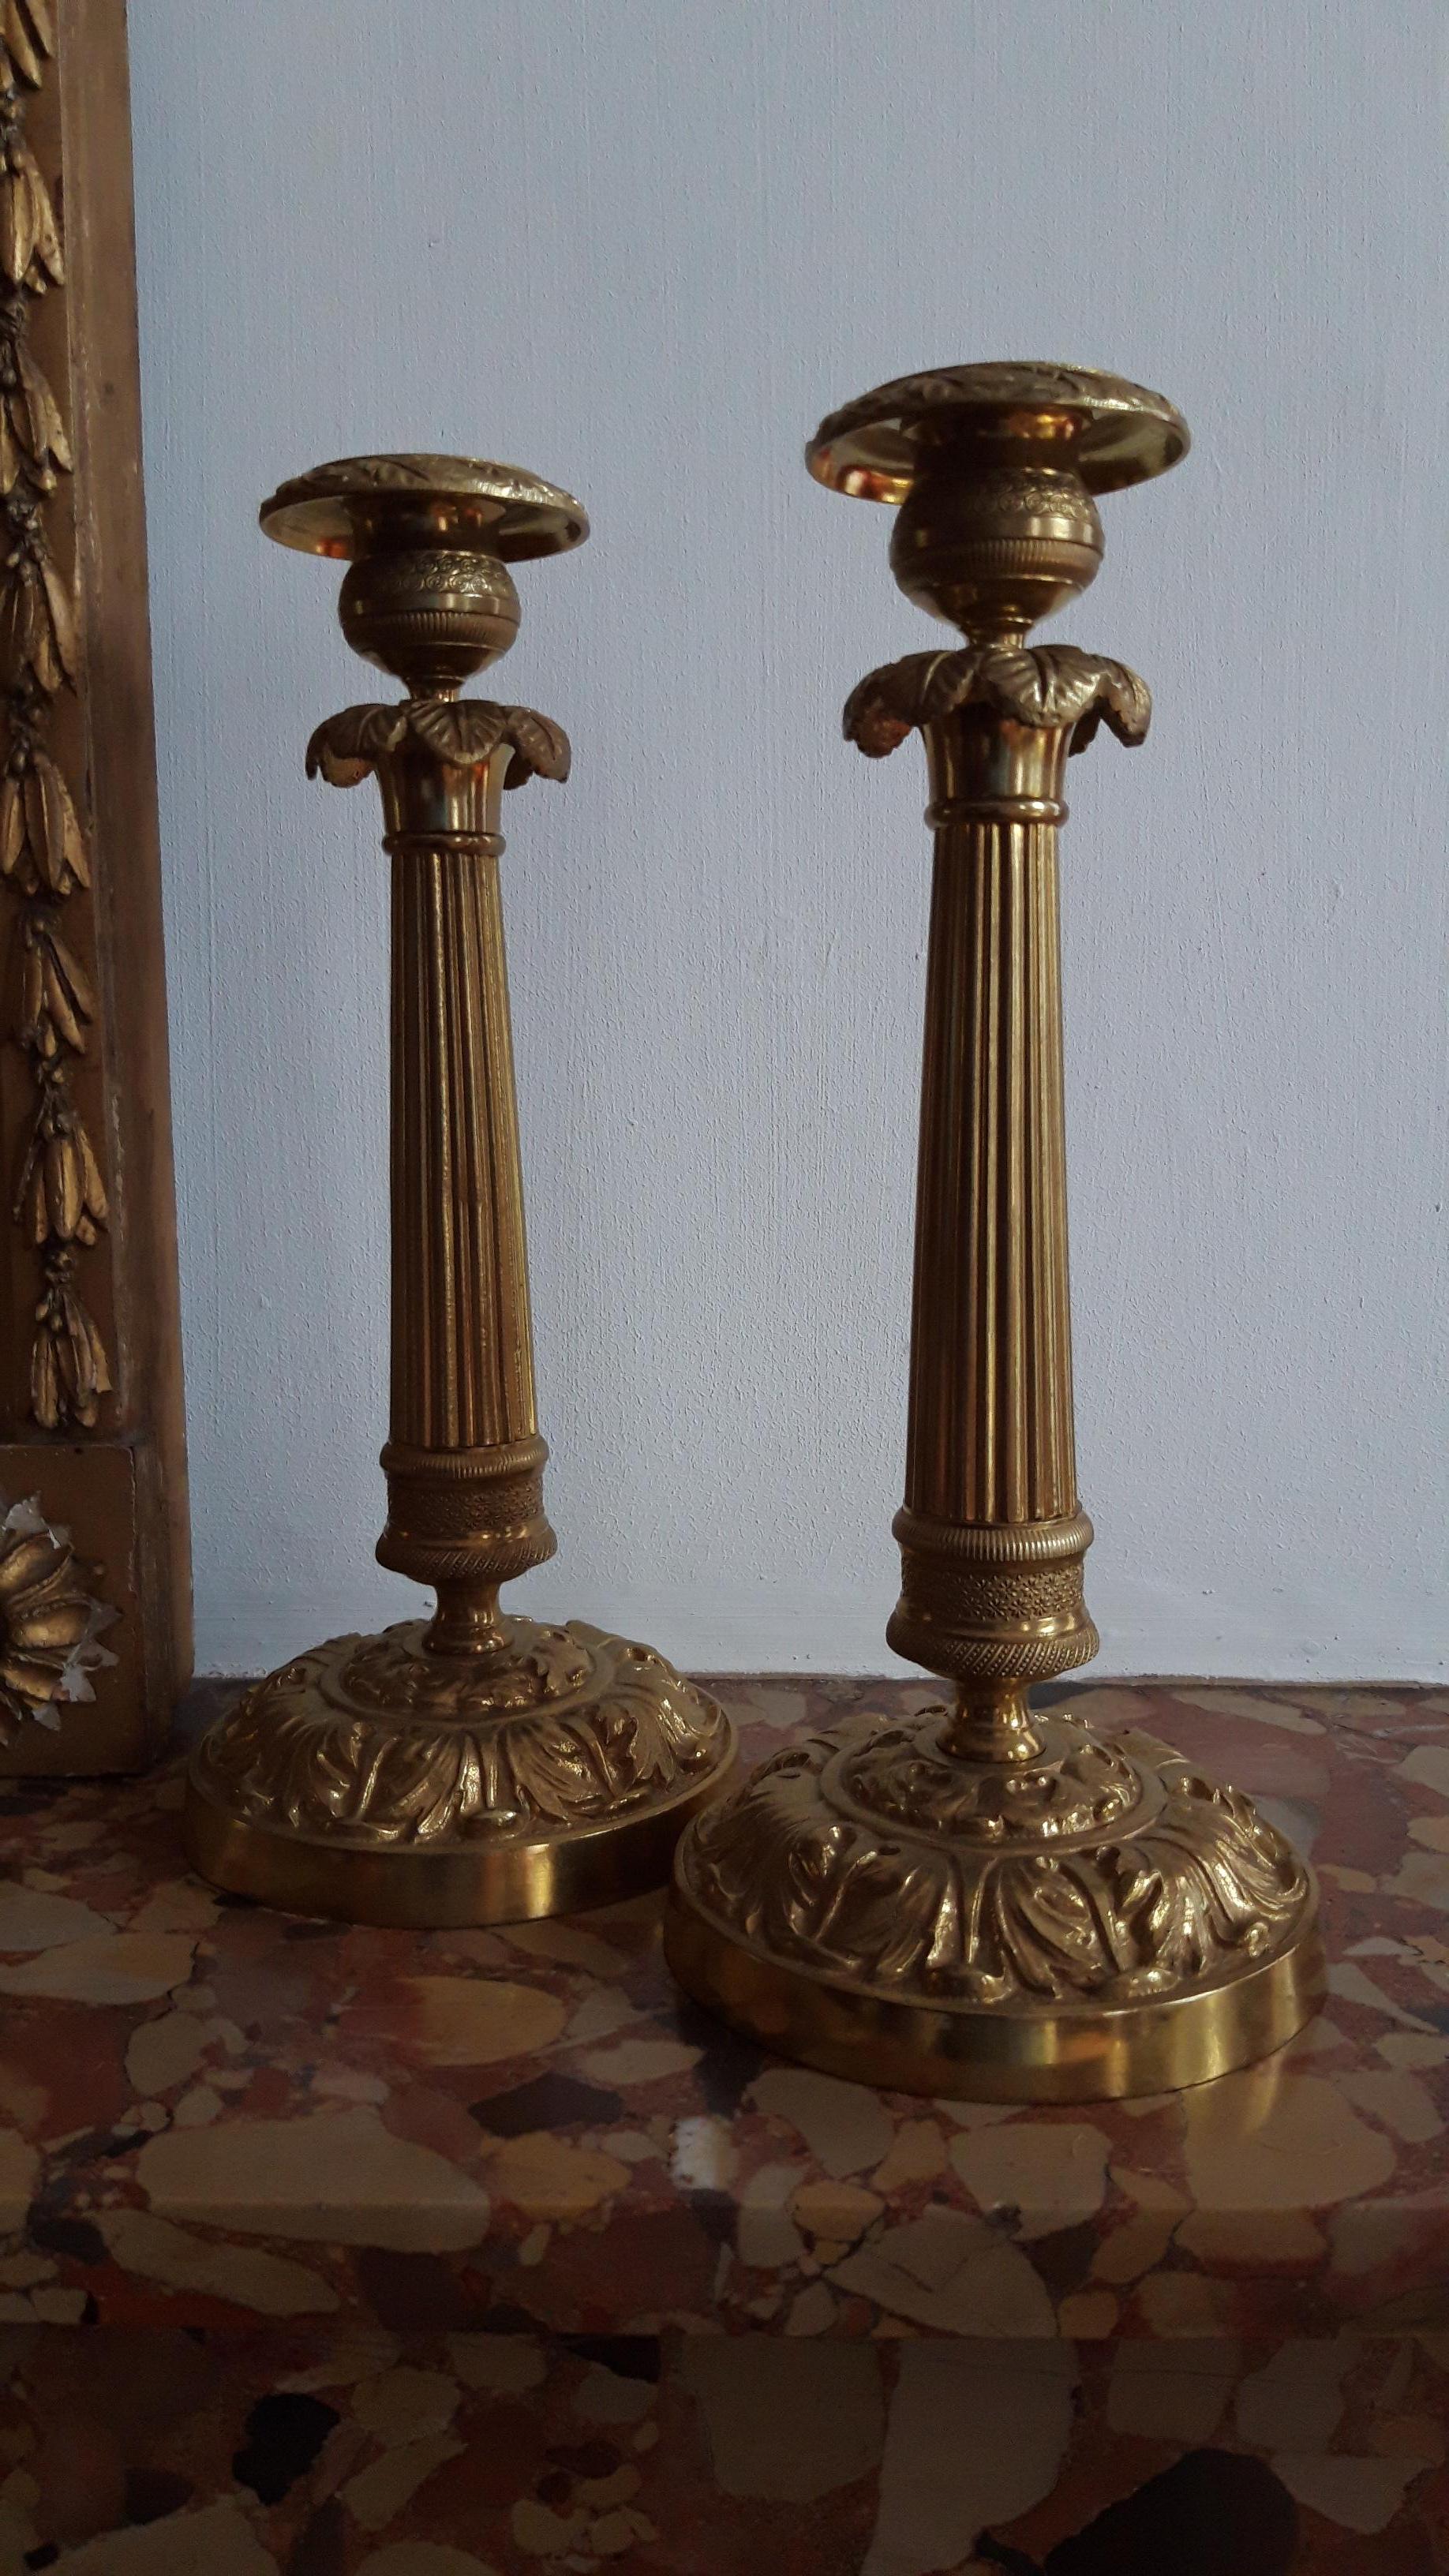 Pair of bronze candlesticks including the often missing nozzles.